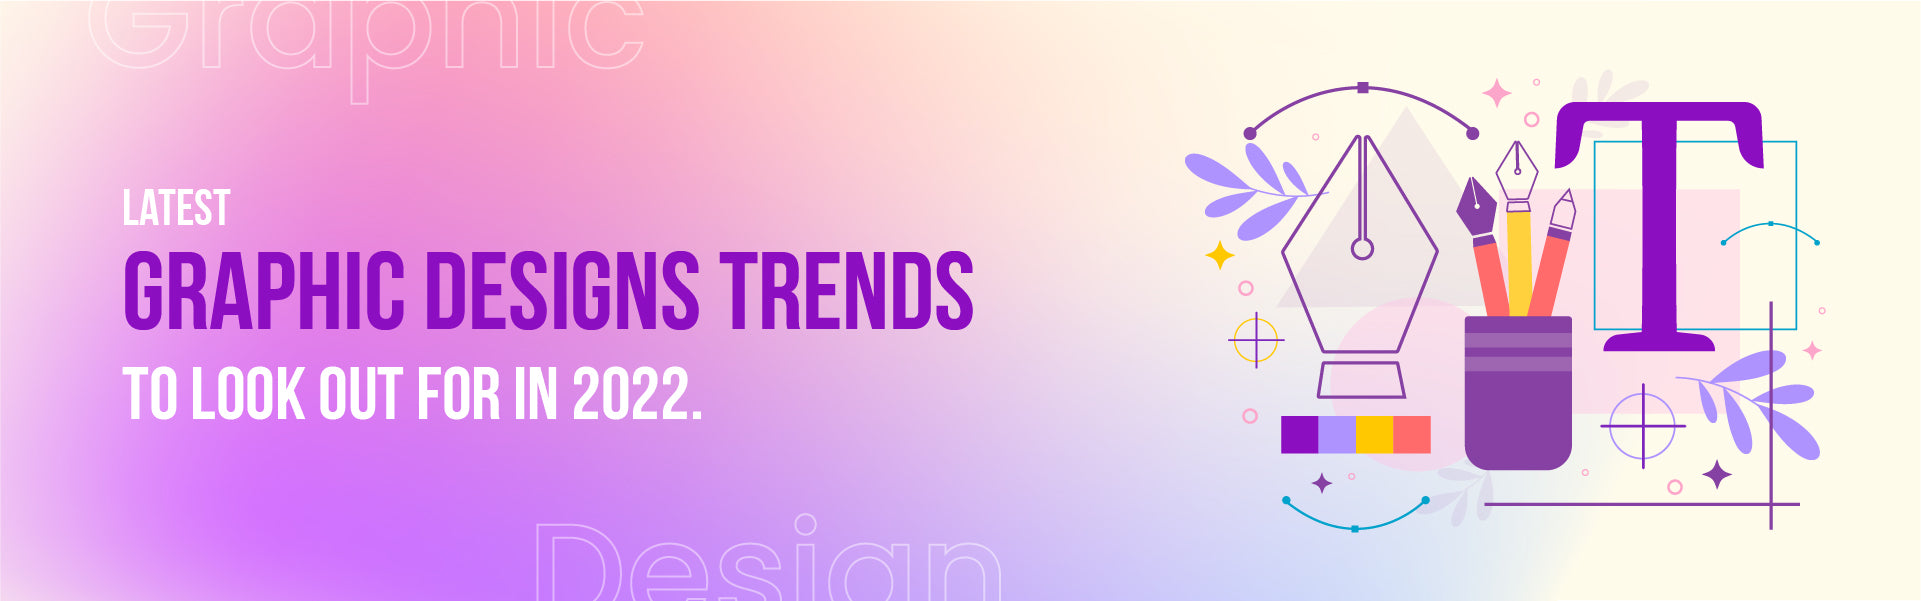 Latest graphic design trends to look out for in 2022